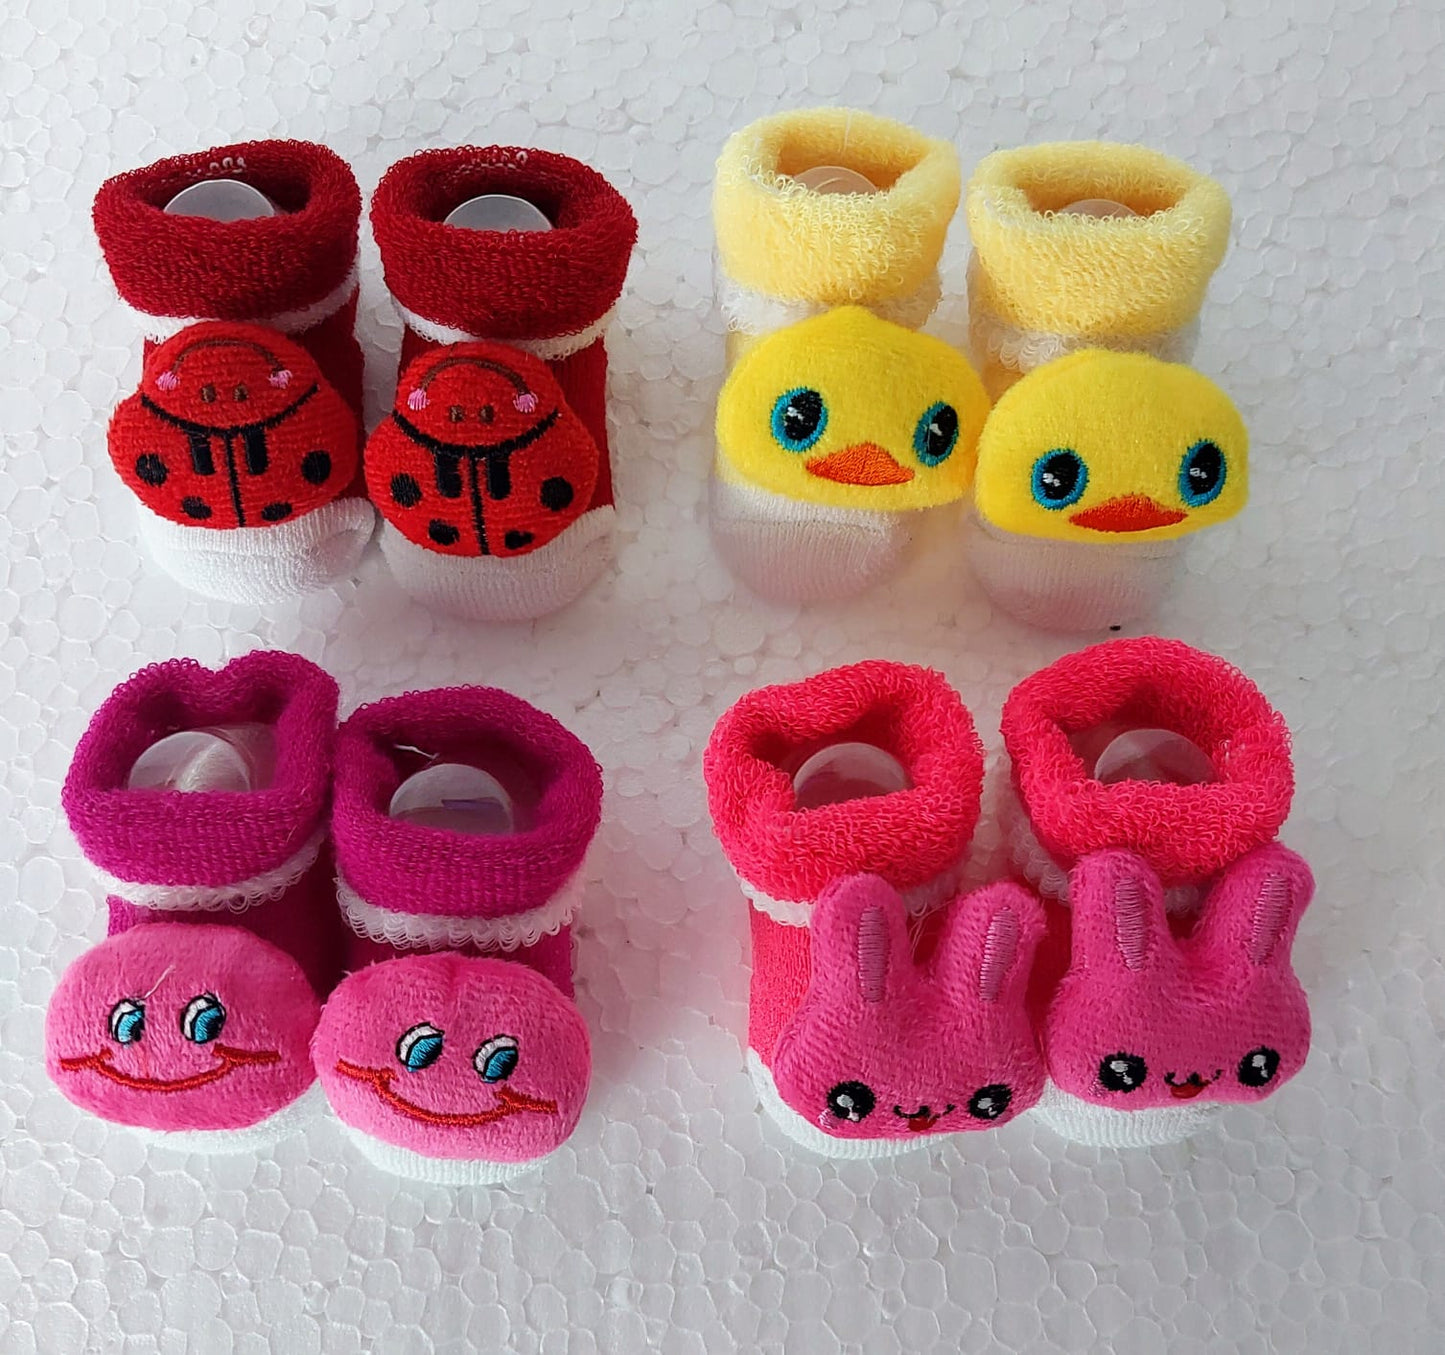 Baby Shoes, Soft and Stylish Shoes for 0-6 Months Baby Girl & Boy ( Color and Design May Vary )